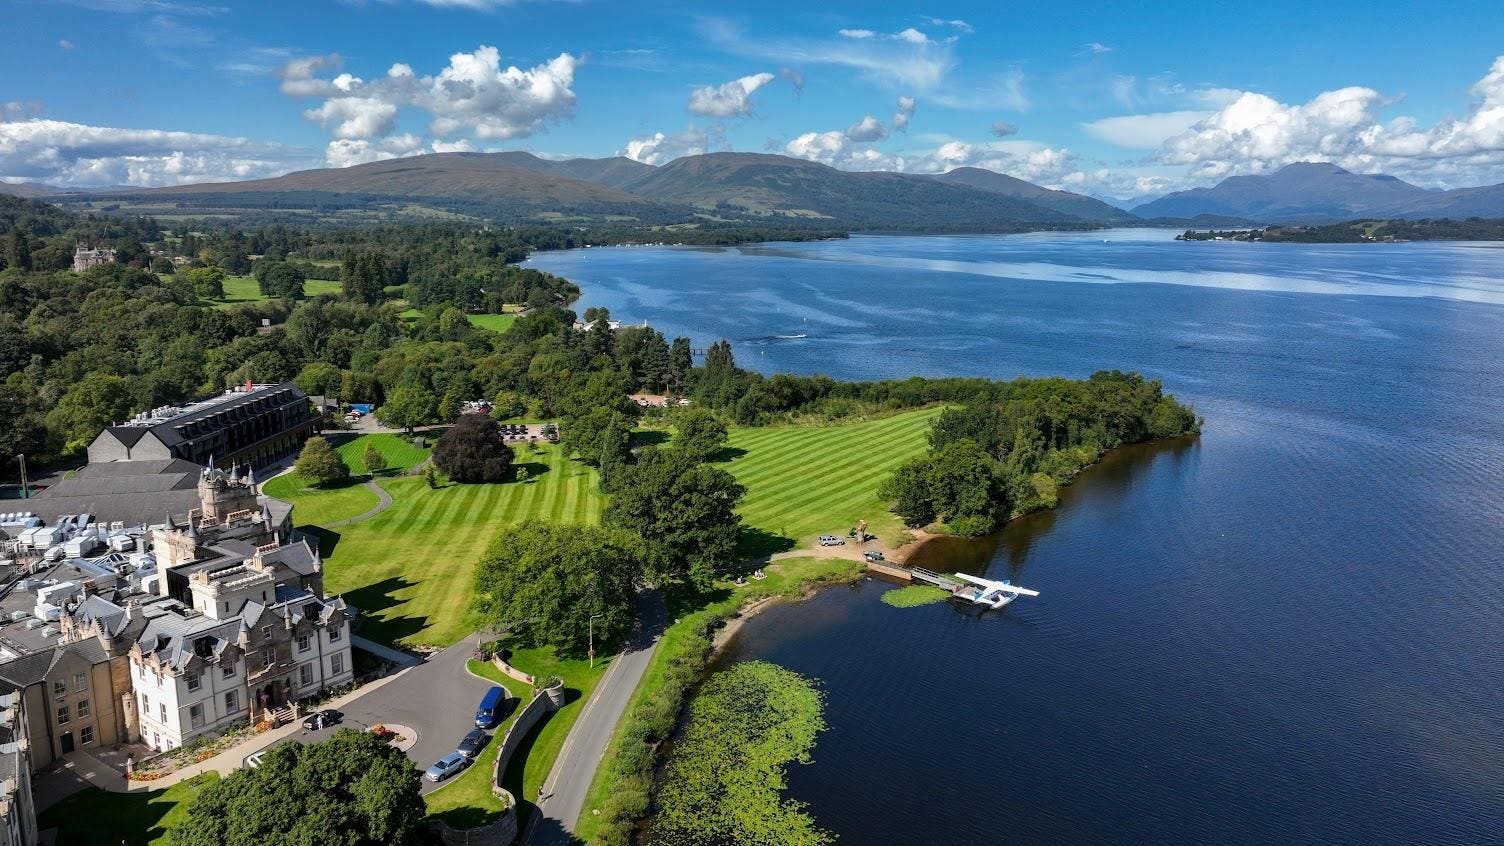 Enjoy A Luxe Scottish Resort That Embraces A Sustainability Ethic